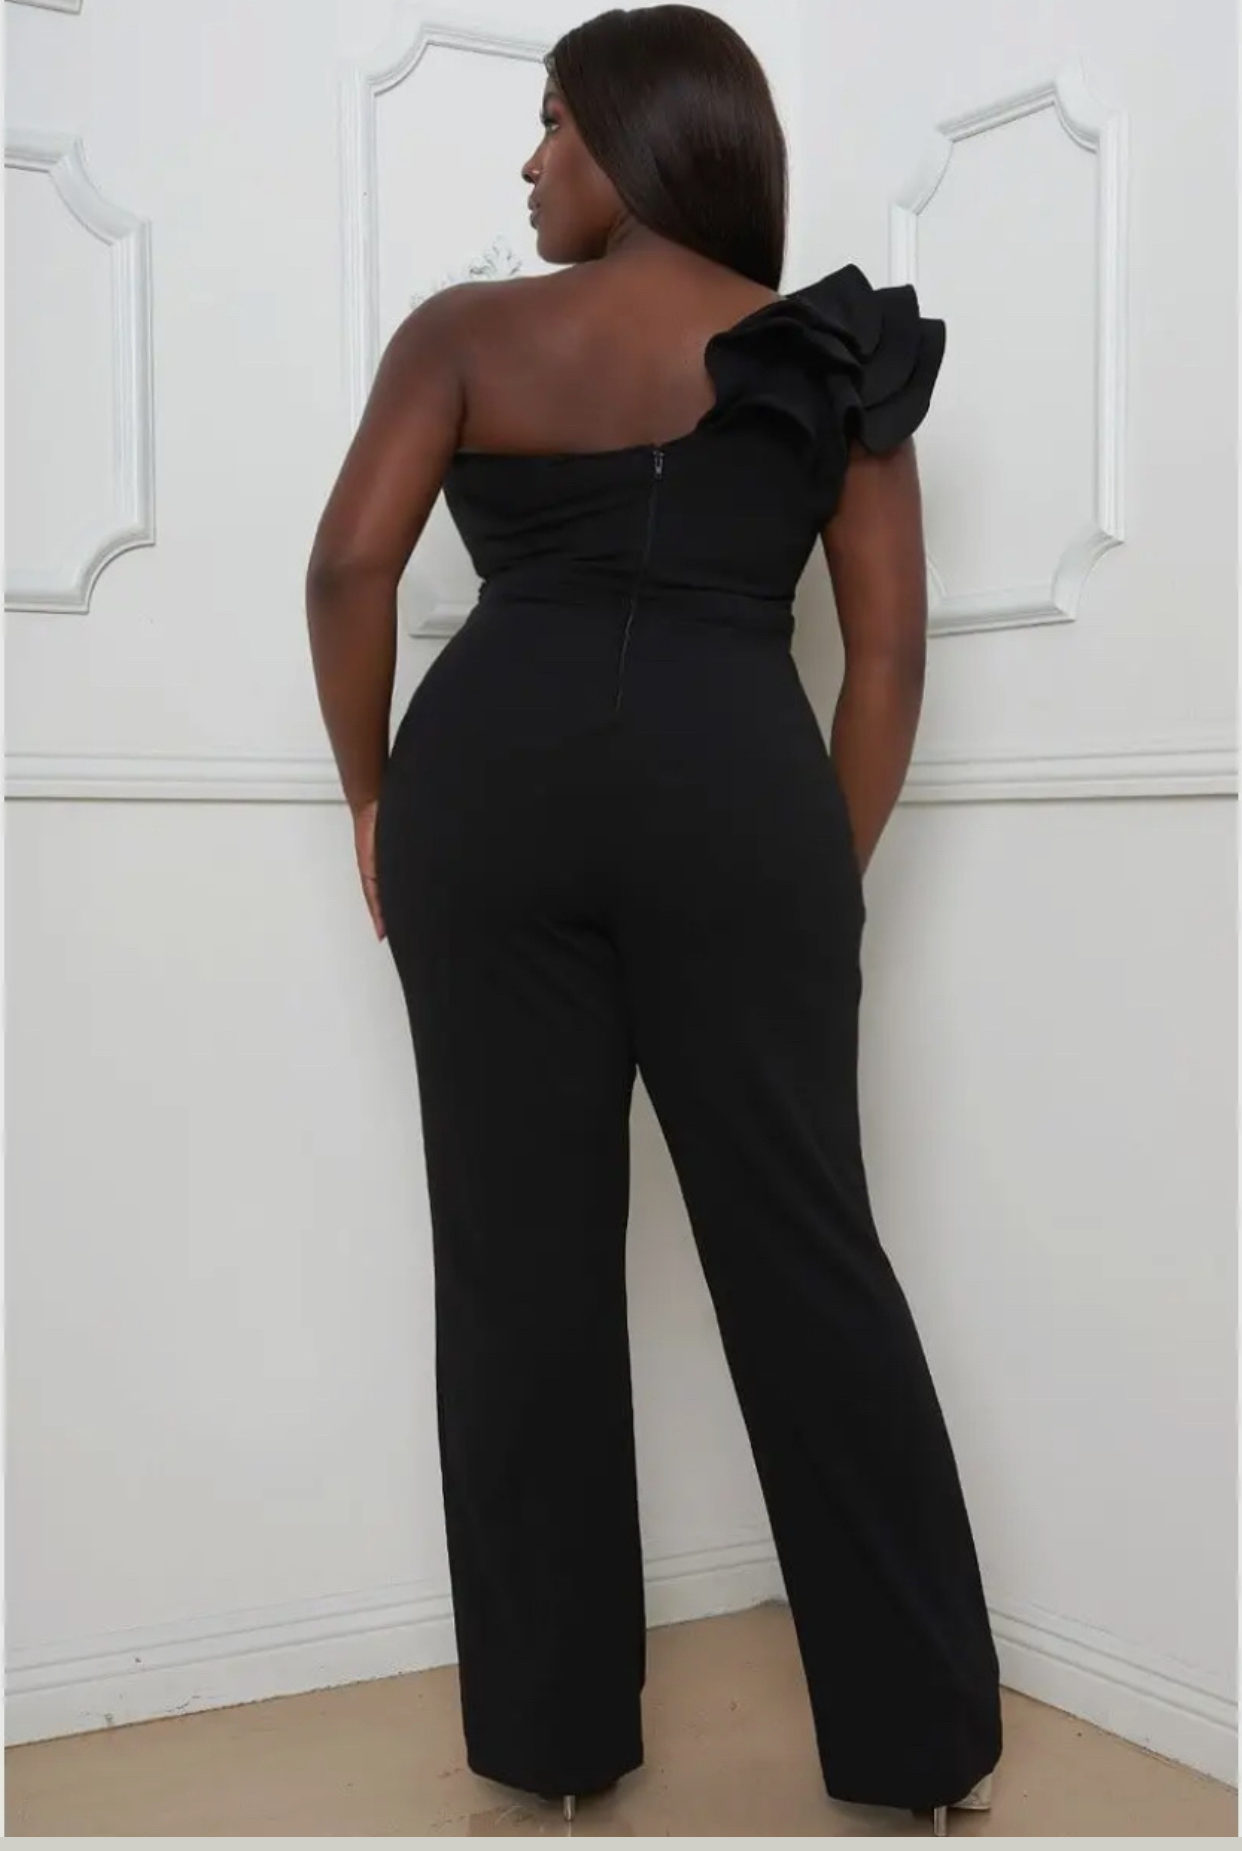 Black Pearl Clothing Plus Size Layered Ruffle One Shoulder Jumpsuit ...